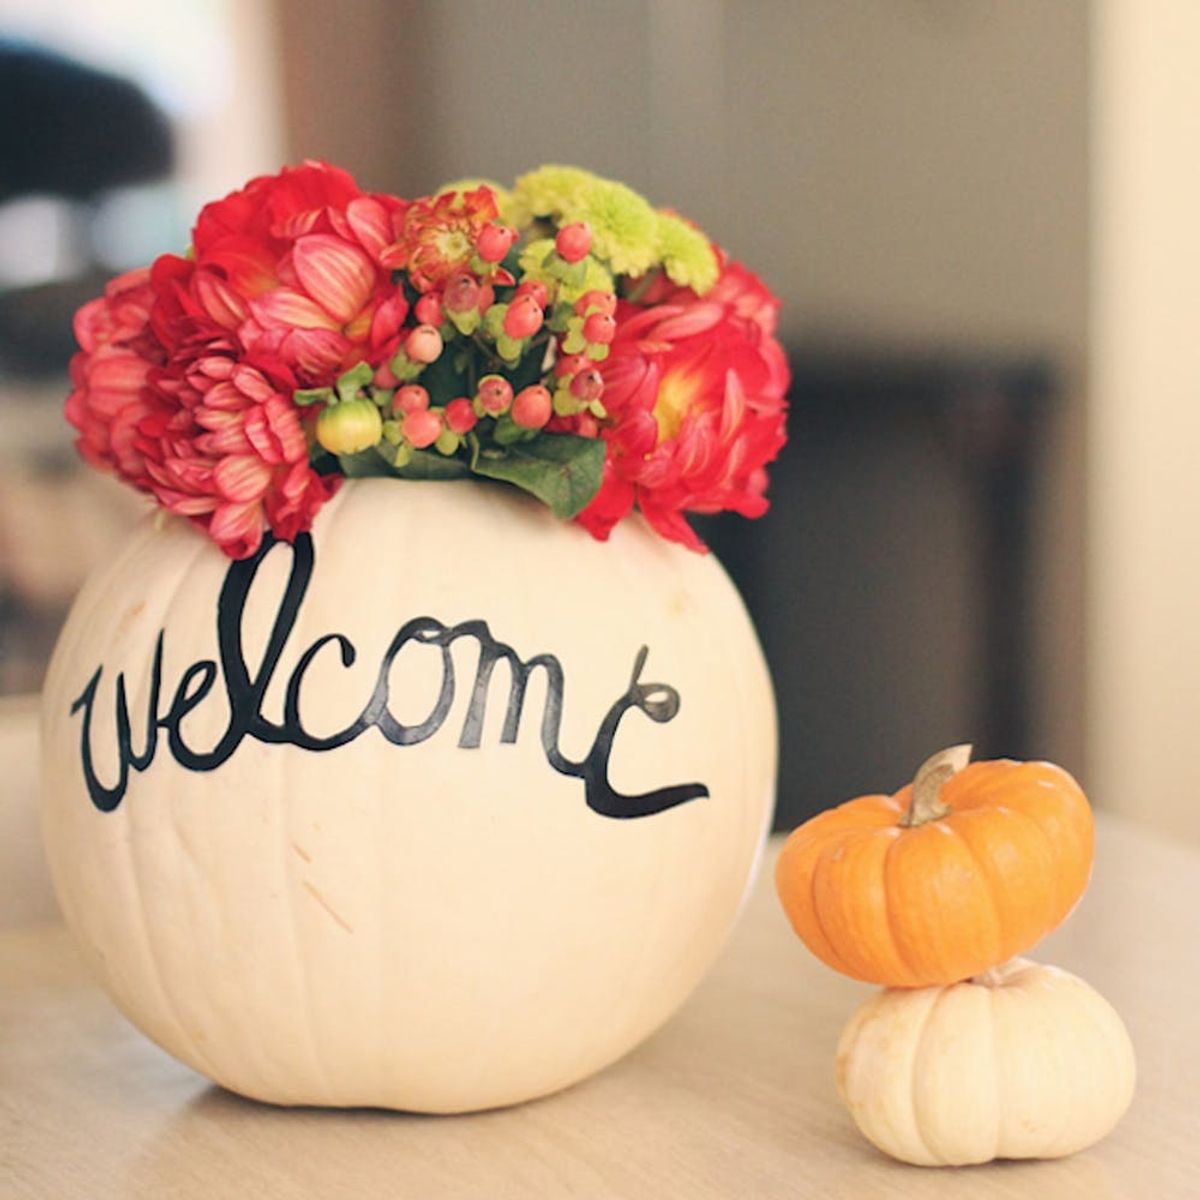 12 Ways to Use Flowers in Your Halloween Decor